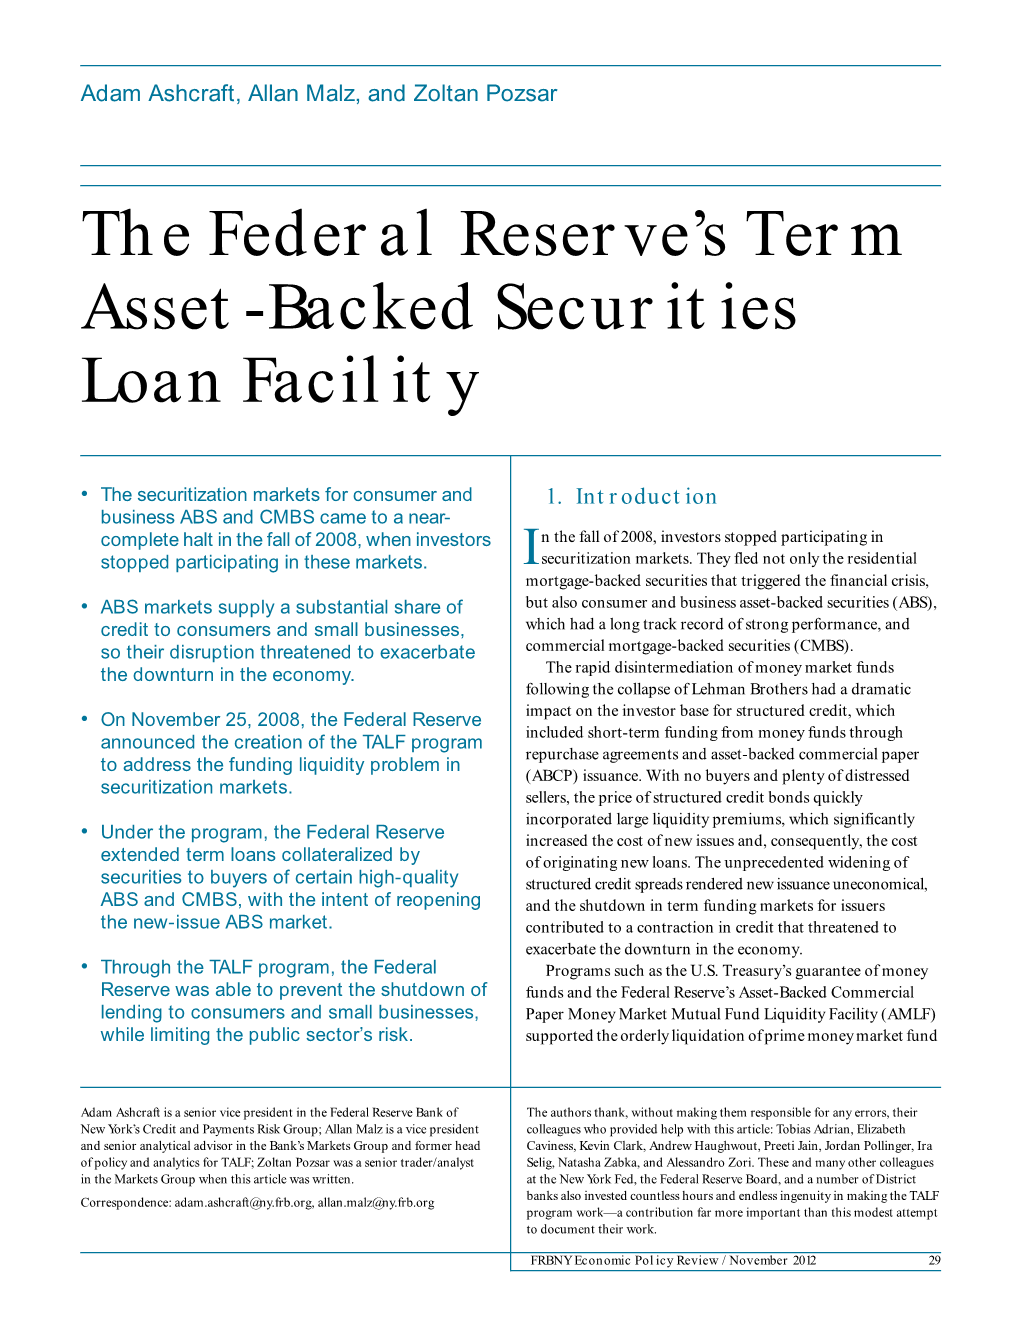 The Federal Reserve's Term Asset-Backed Securities Loan Facility